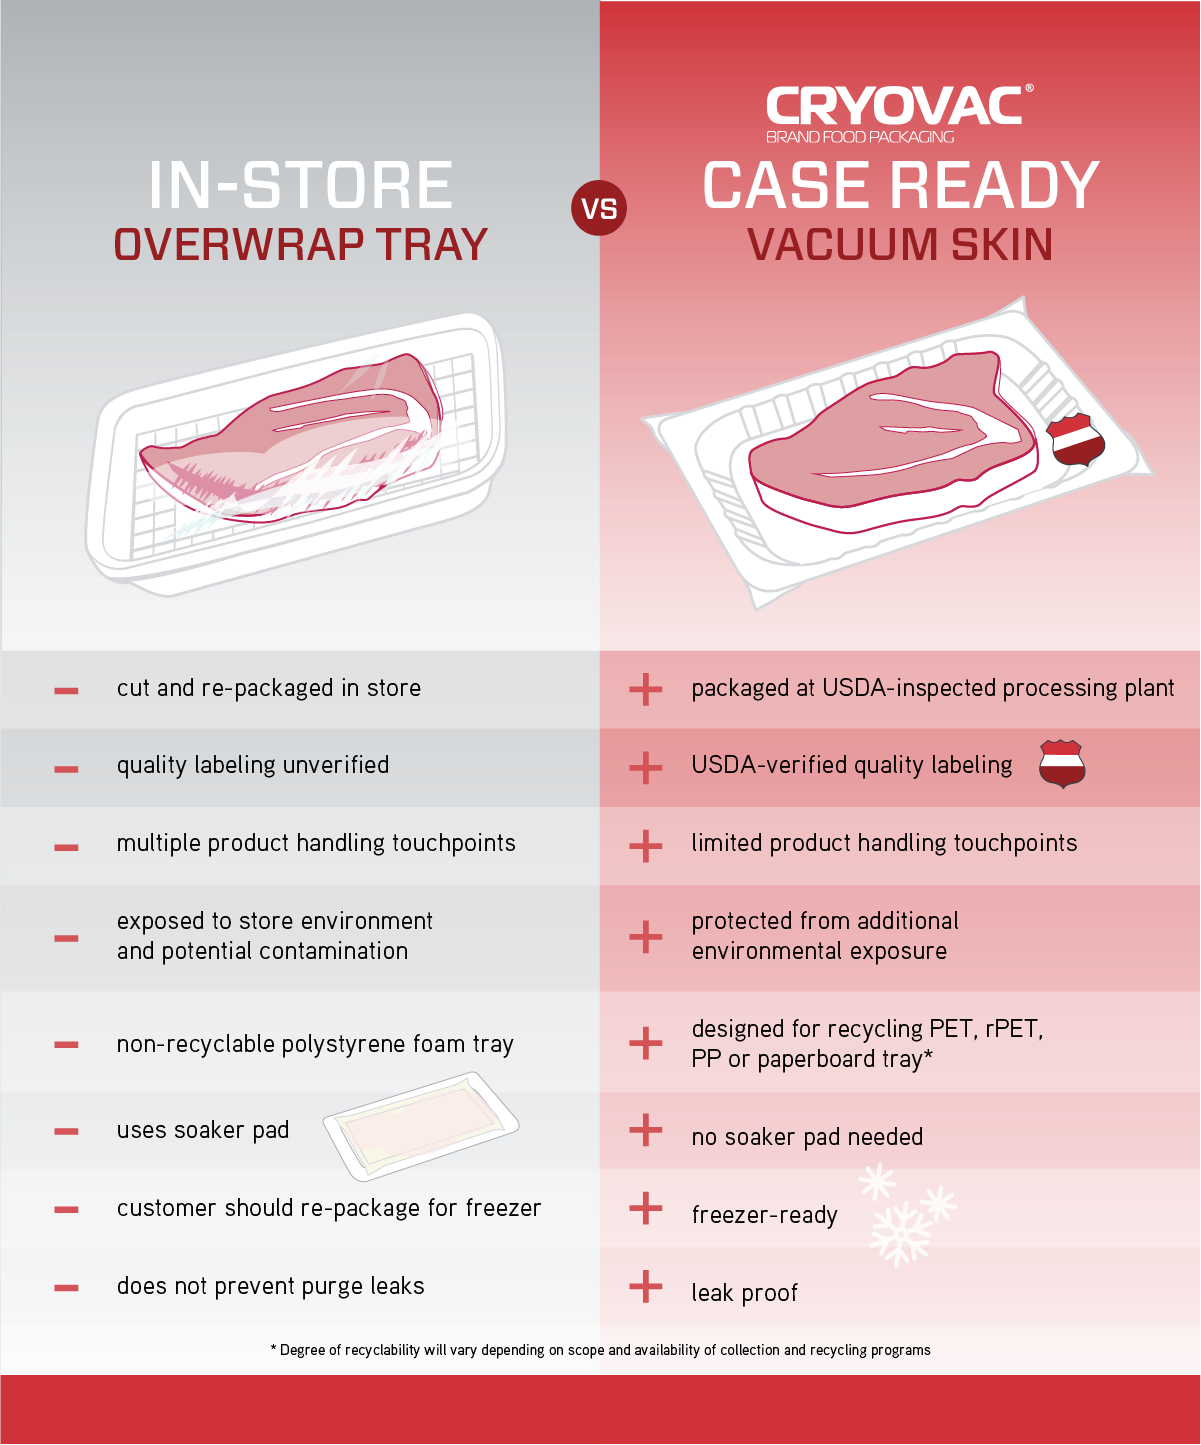 chart displaying difference between on-store overwrap tray packaging versus Cryovac Case-Ready Vacuum Skin packaging